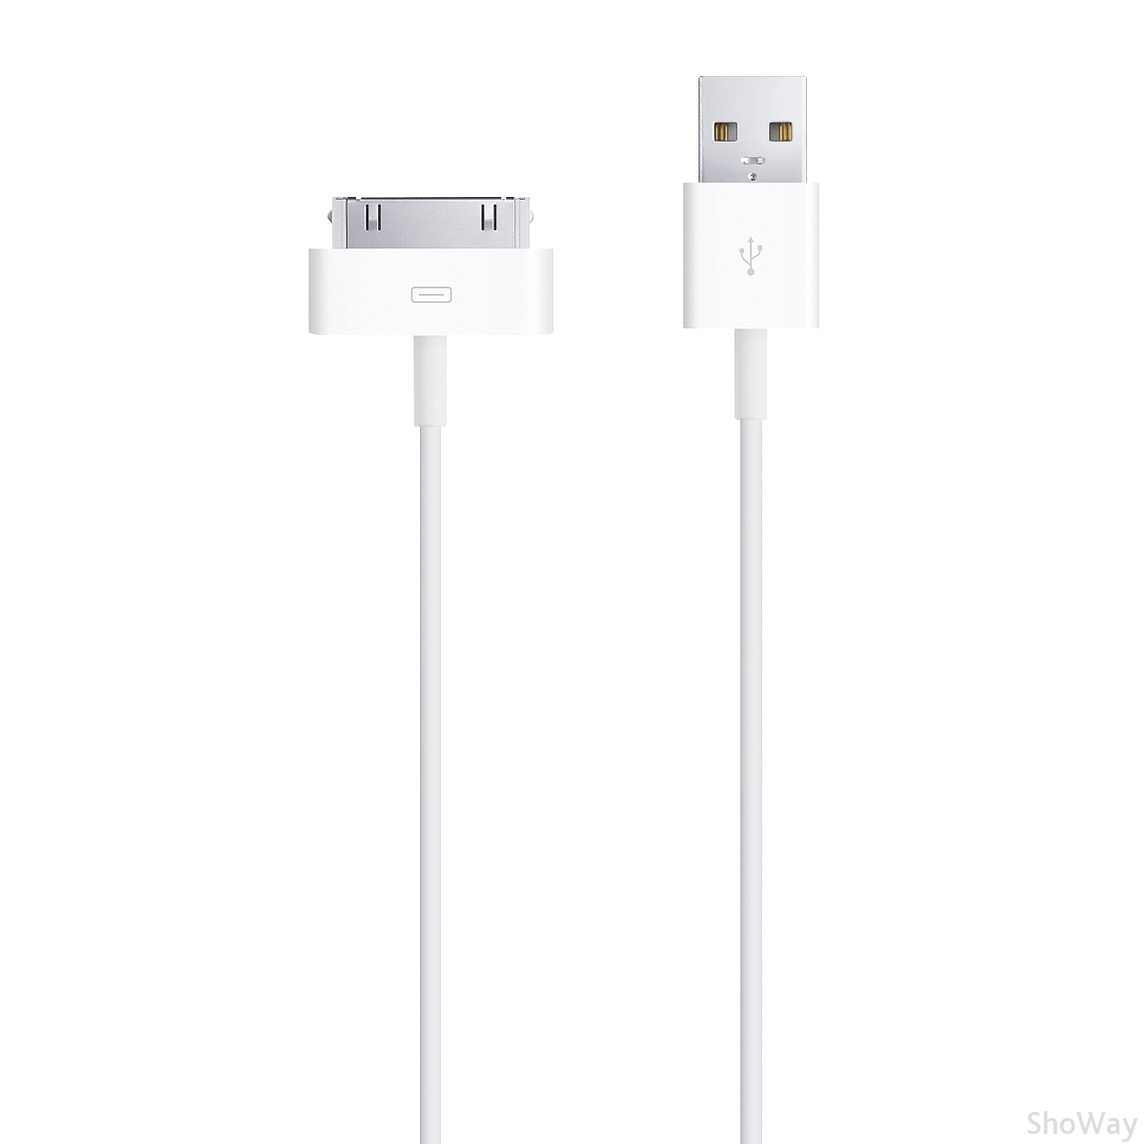 Usb apple iphone. Apple 30 Pin to USB Cable. Кабель iphone 4/4s ma591g. Кабель Apple USB - Apple 30 Pin (ma591zm/c) 1 м. Кабель Apple USB-C muf72zm (1 метр).